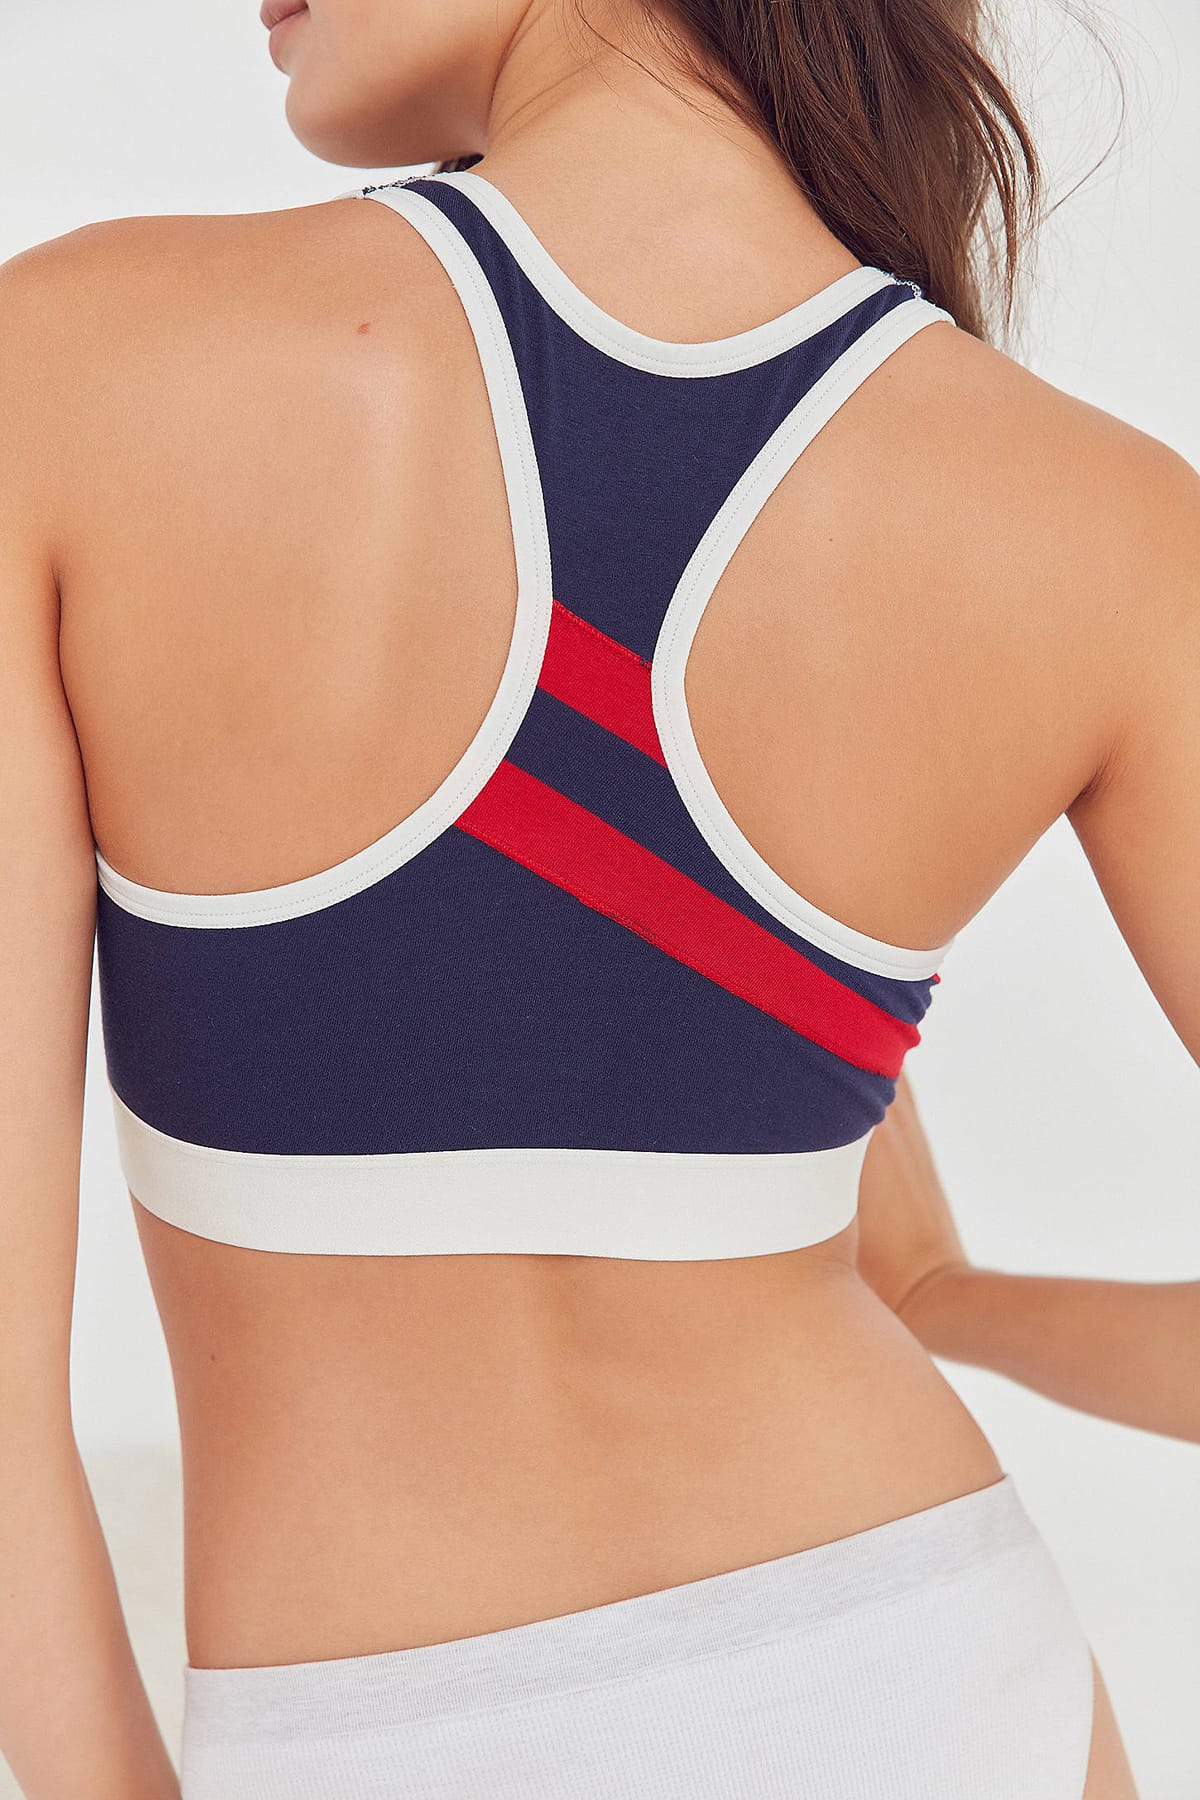 urban outfitters tommy hilfiger bra